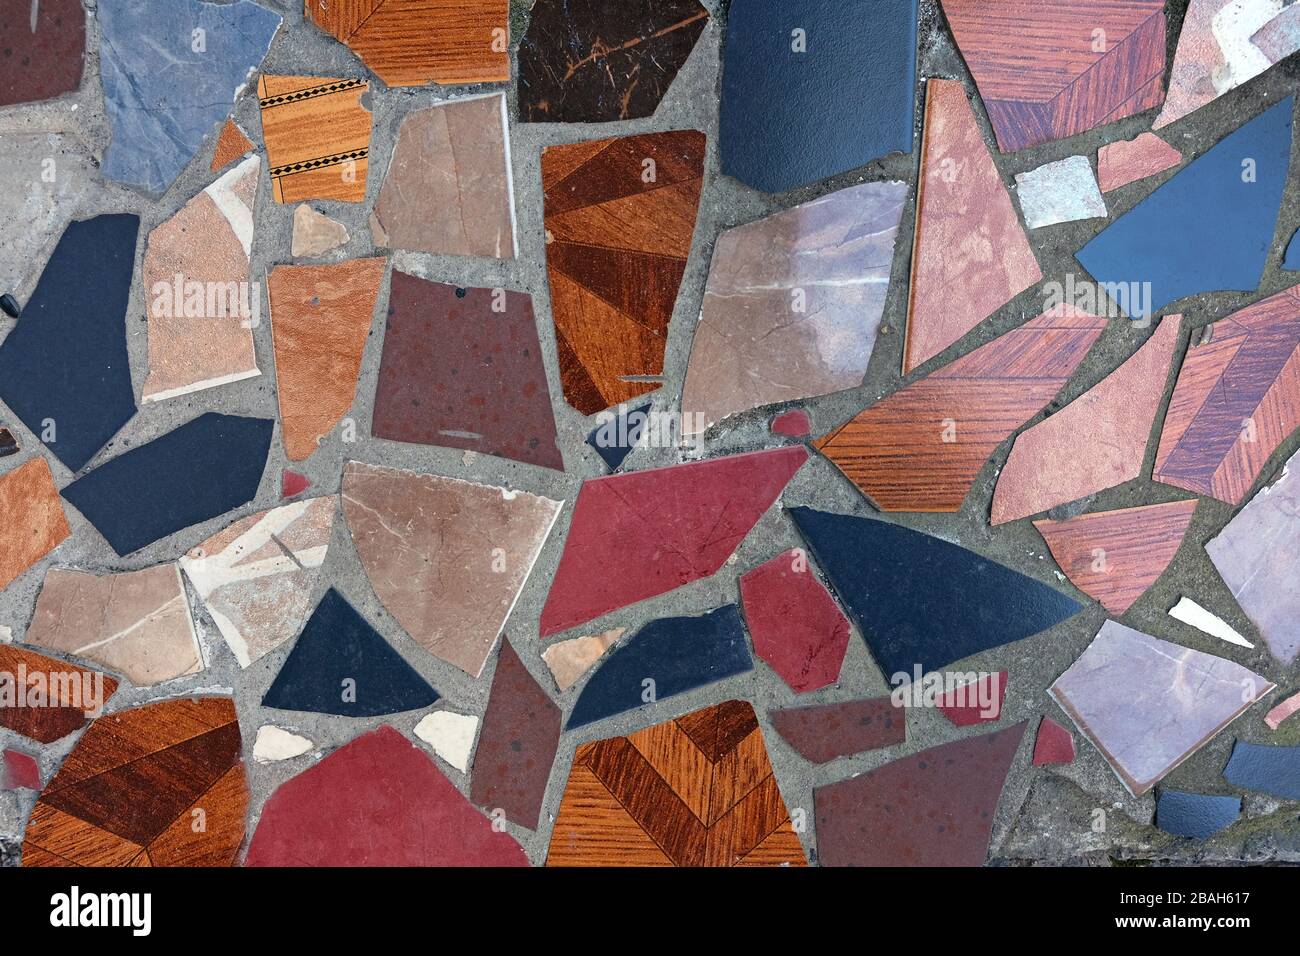 Fragment Of A Floor From Pieces Of A Multi Colored Tile Background